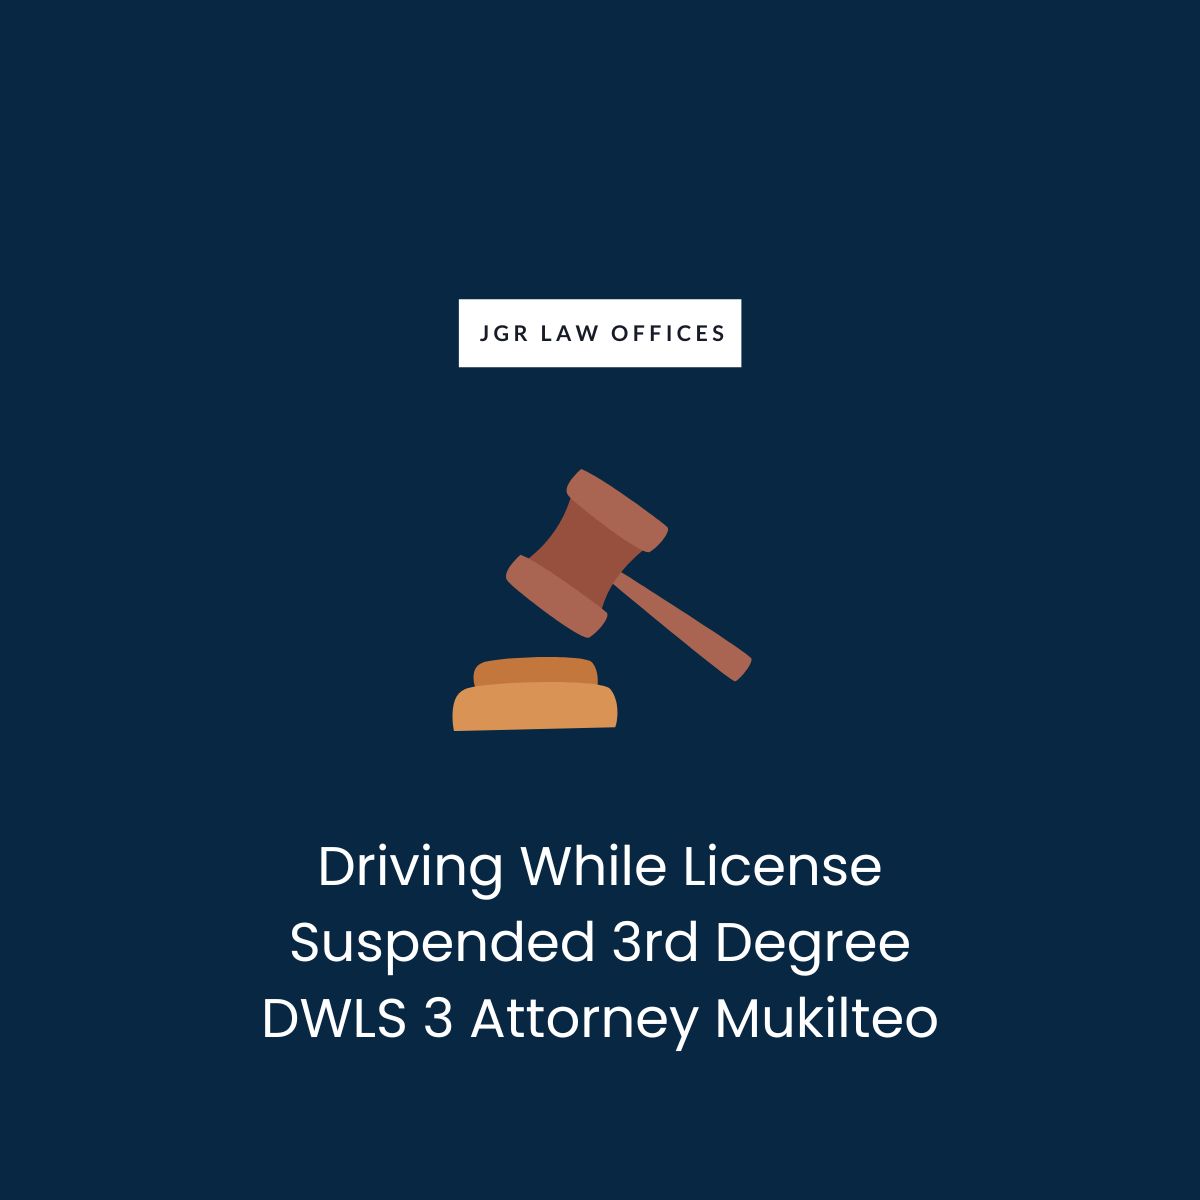 Driving While License Suspended 3rd Degree DWLS 3 Attorney Mukilteo